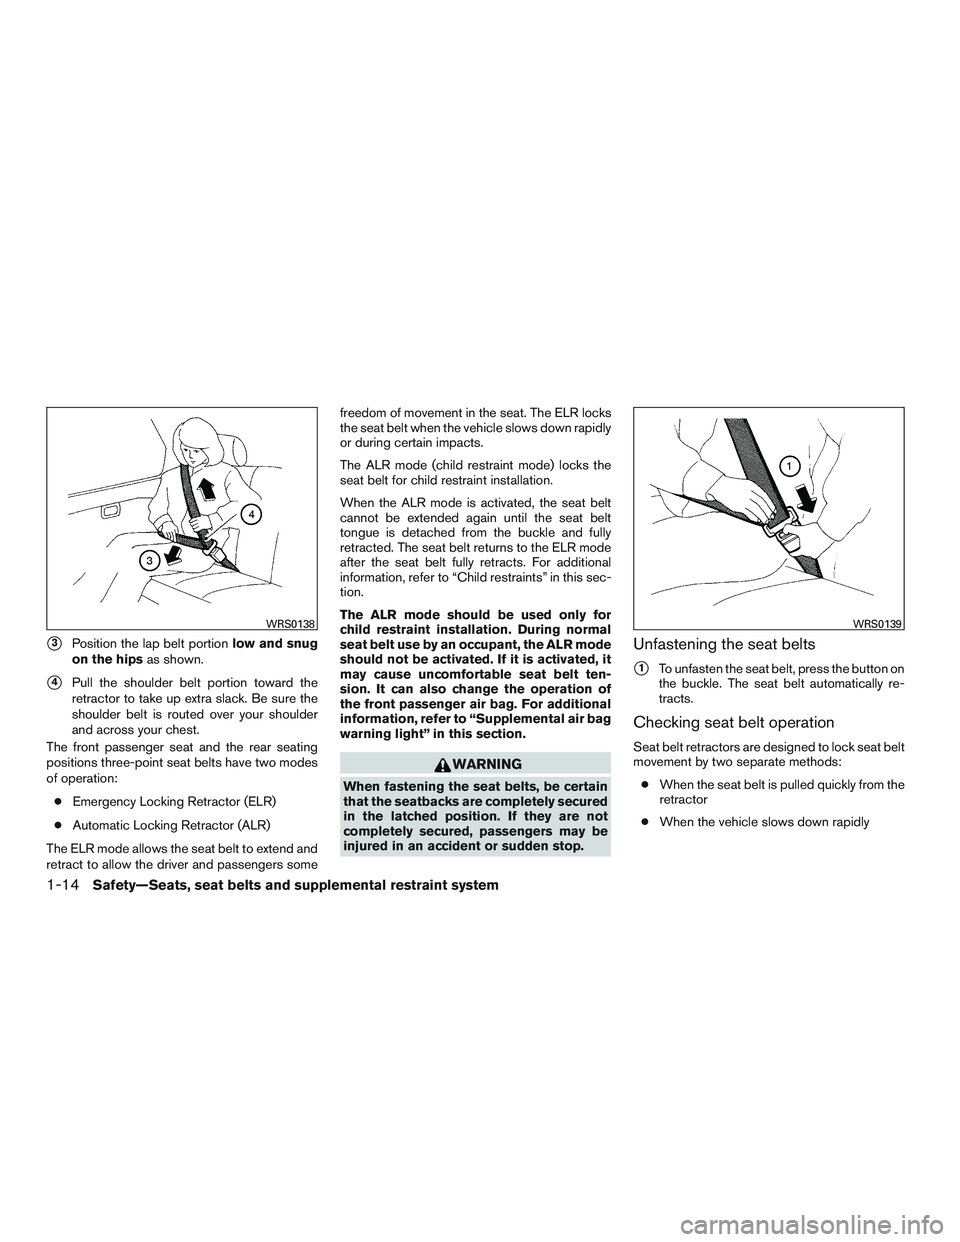 NISSAN MICRA 2012 Owners Guide 3Position the lap belt portionlow and snug
on the hips as shown.
4Pull the shoulder belt portion toward the
retractor to take up extra slack. Be sure the
shoulder belt is routed over your shoulder
a